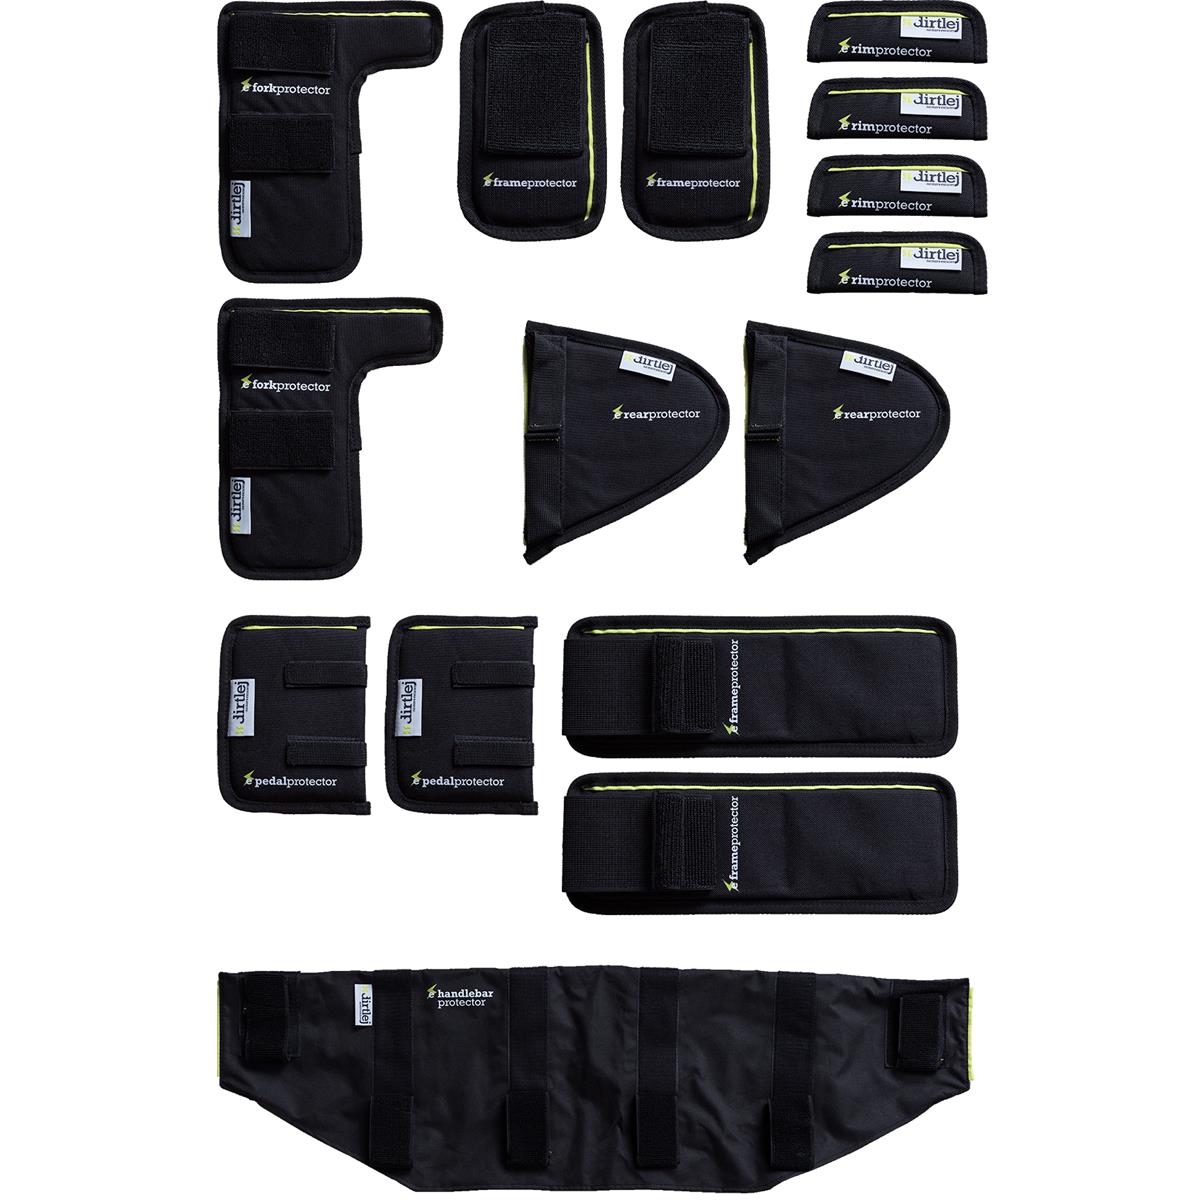 Dirtlej MTB Transport Protection E-Bike Protection 16 pieces